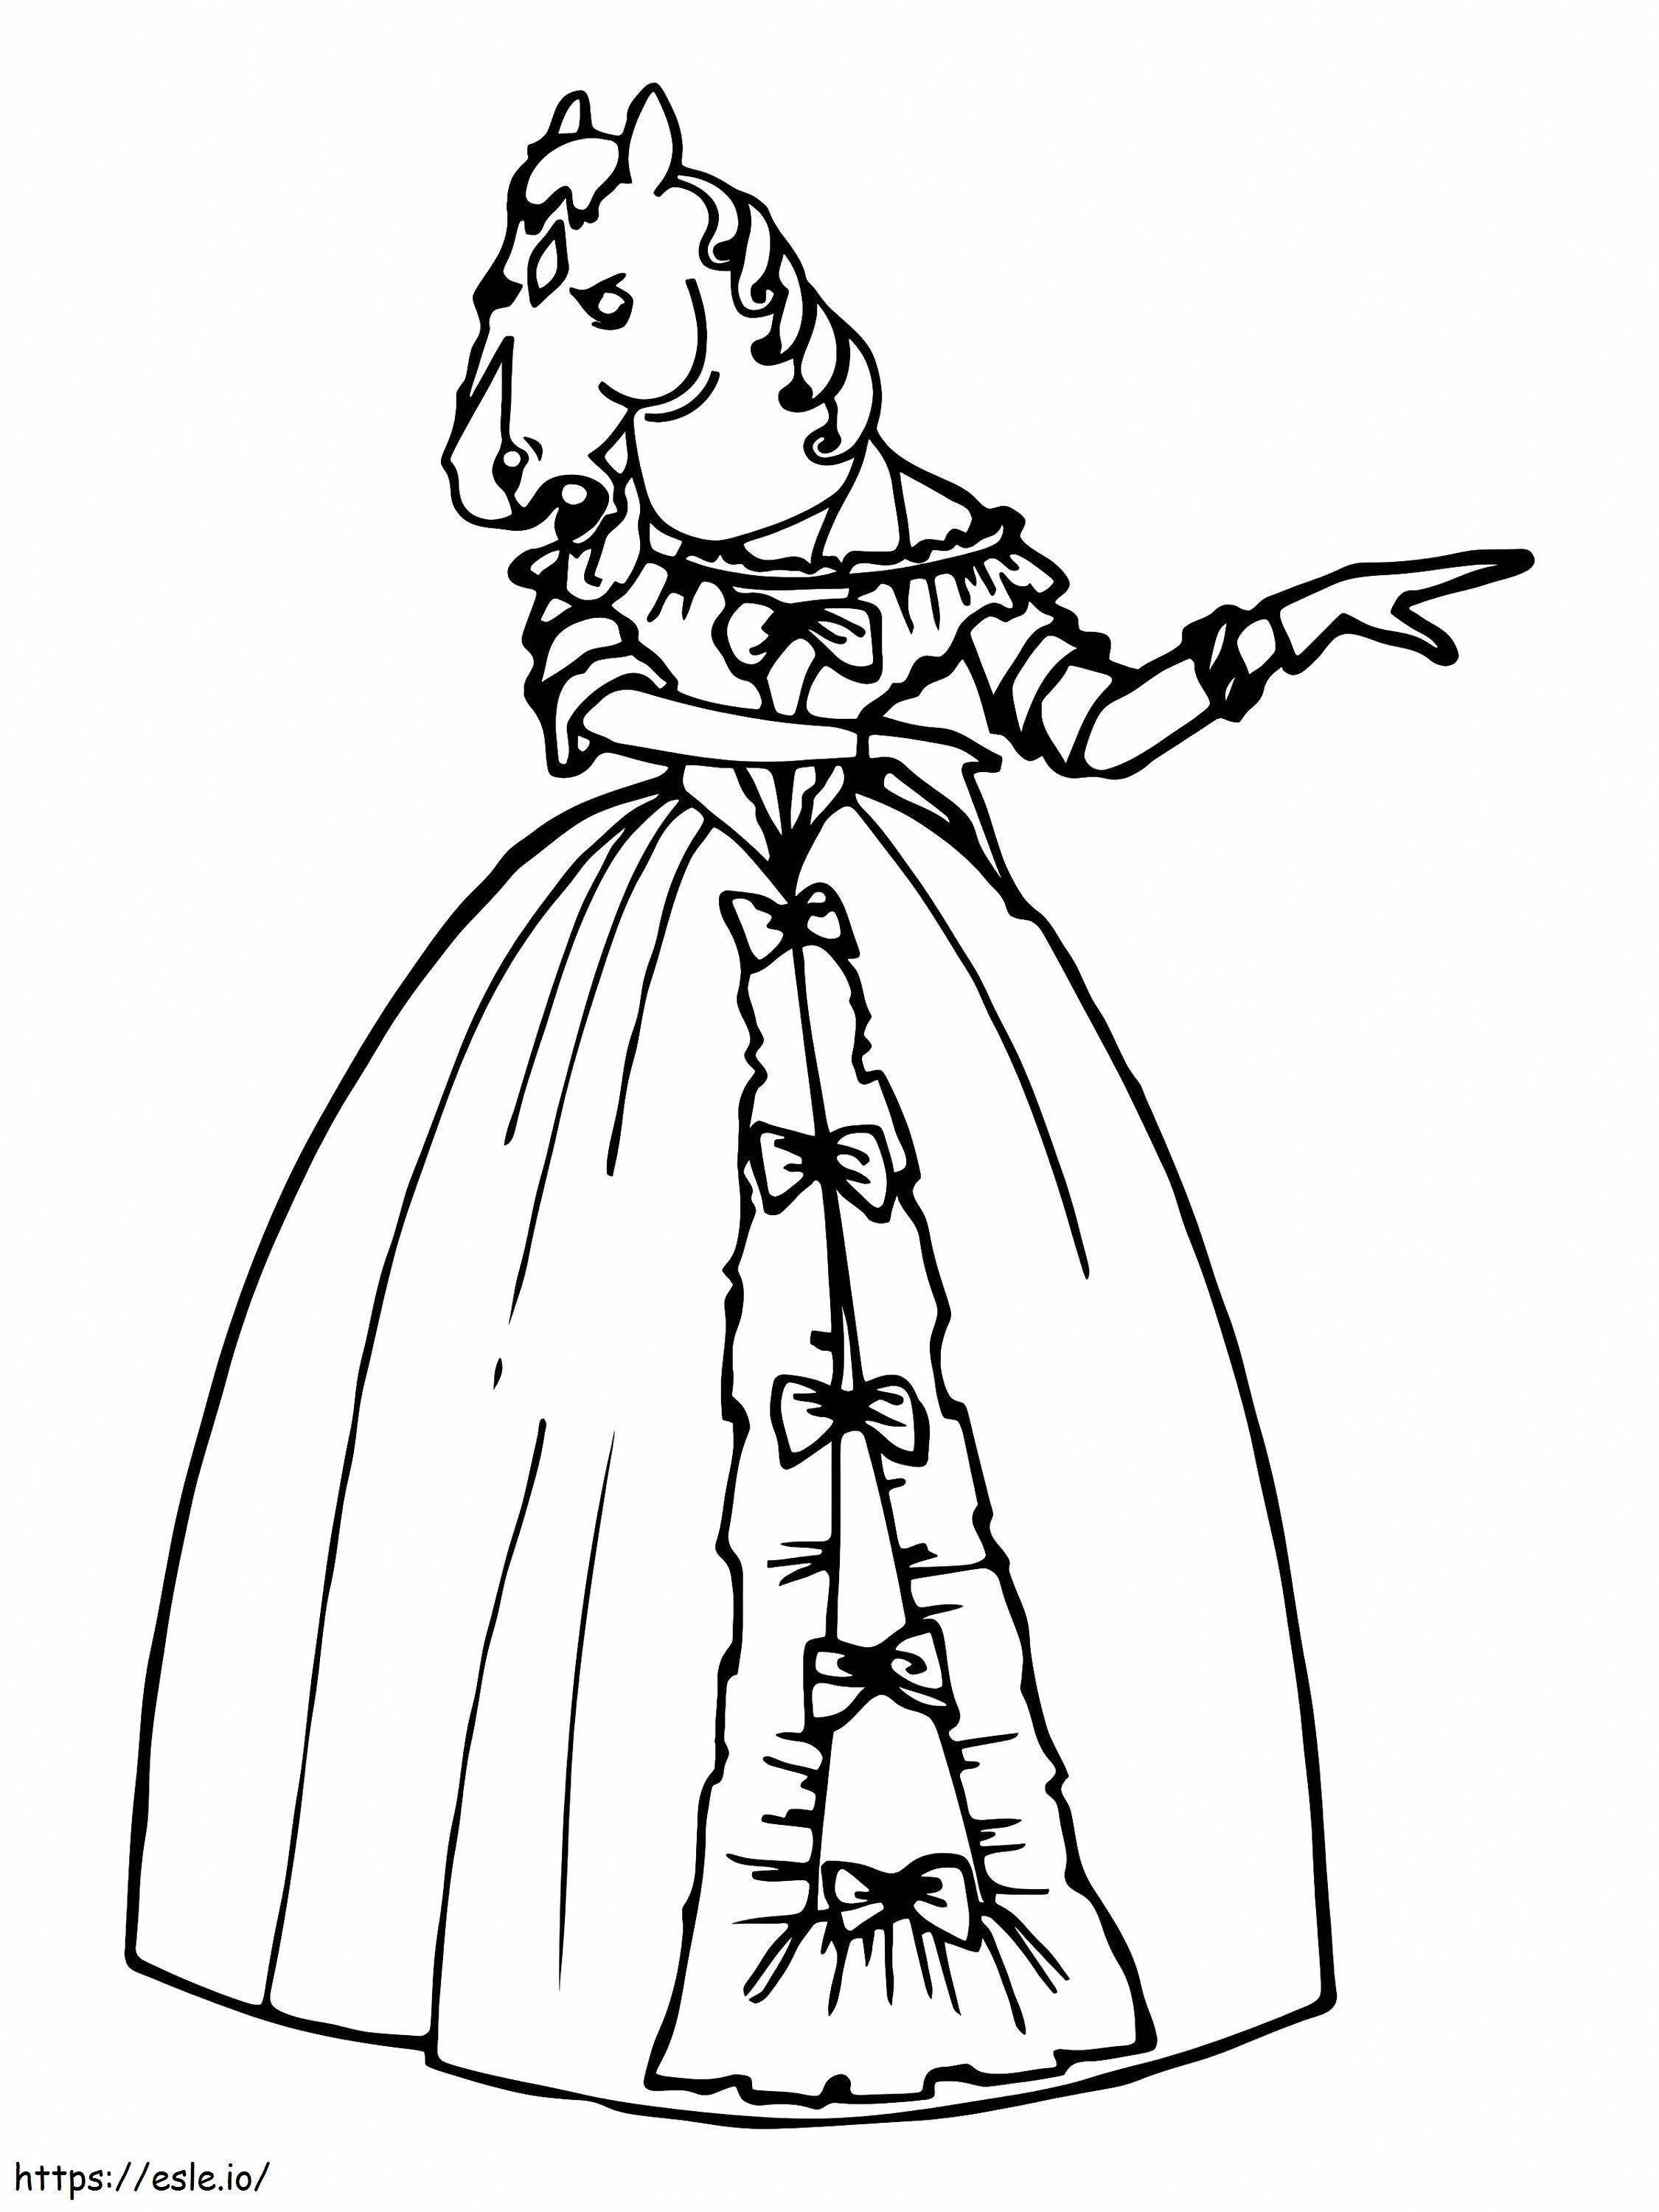 Admirable Beatrice Horseman coloring page